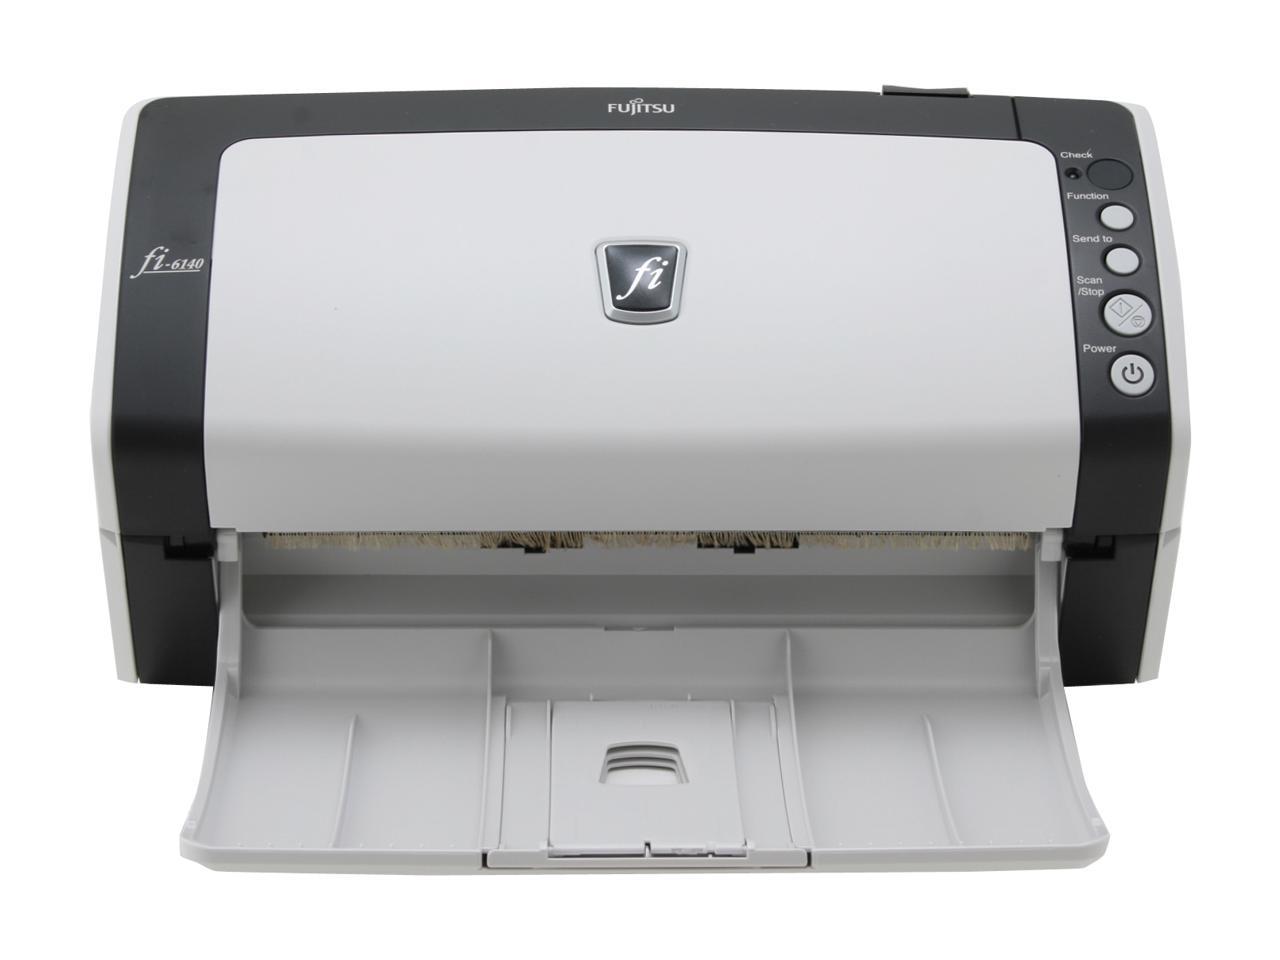 Fi 6140 Color Duplex Document Scanner: Enhancing Productivity with Precision